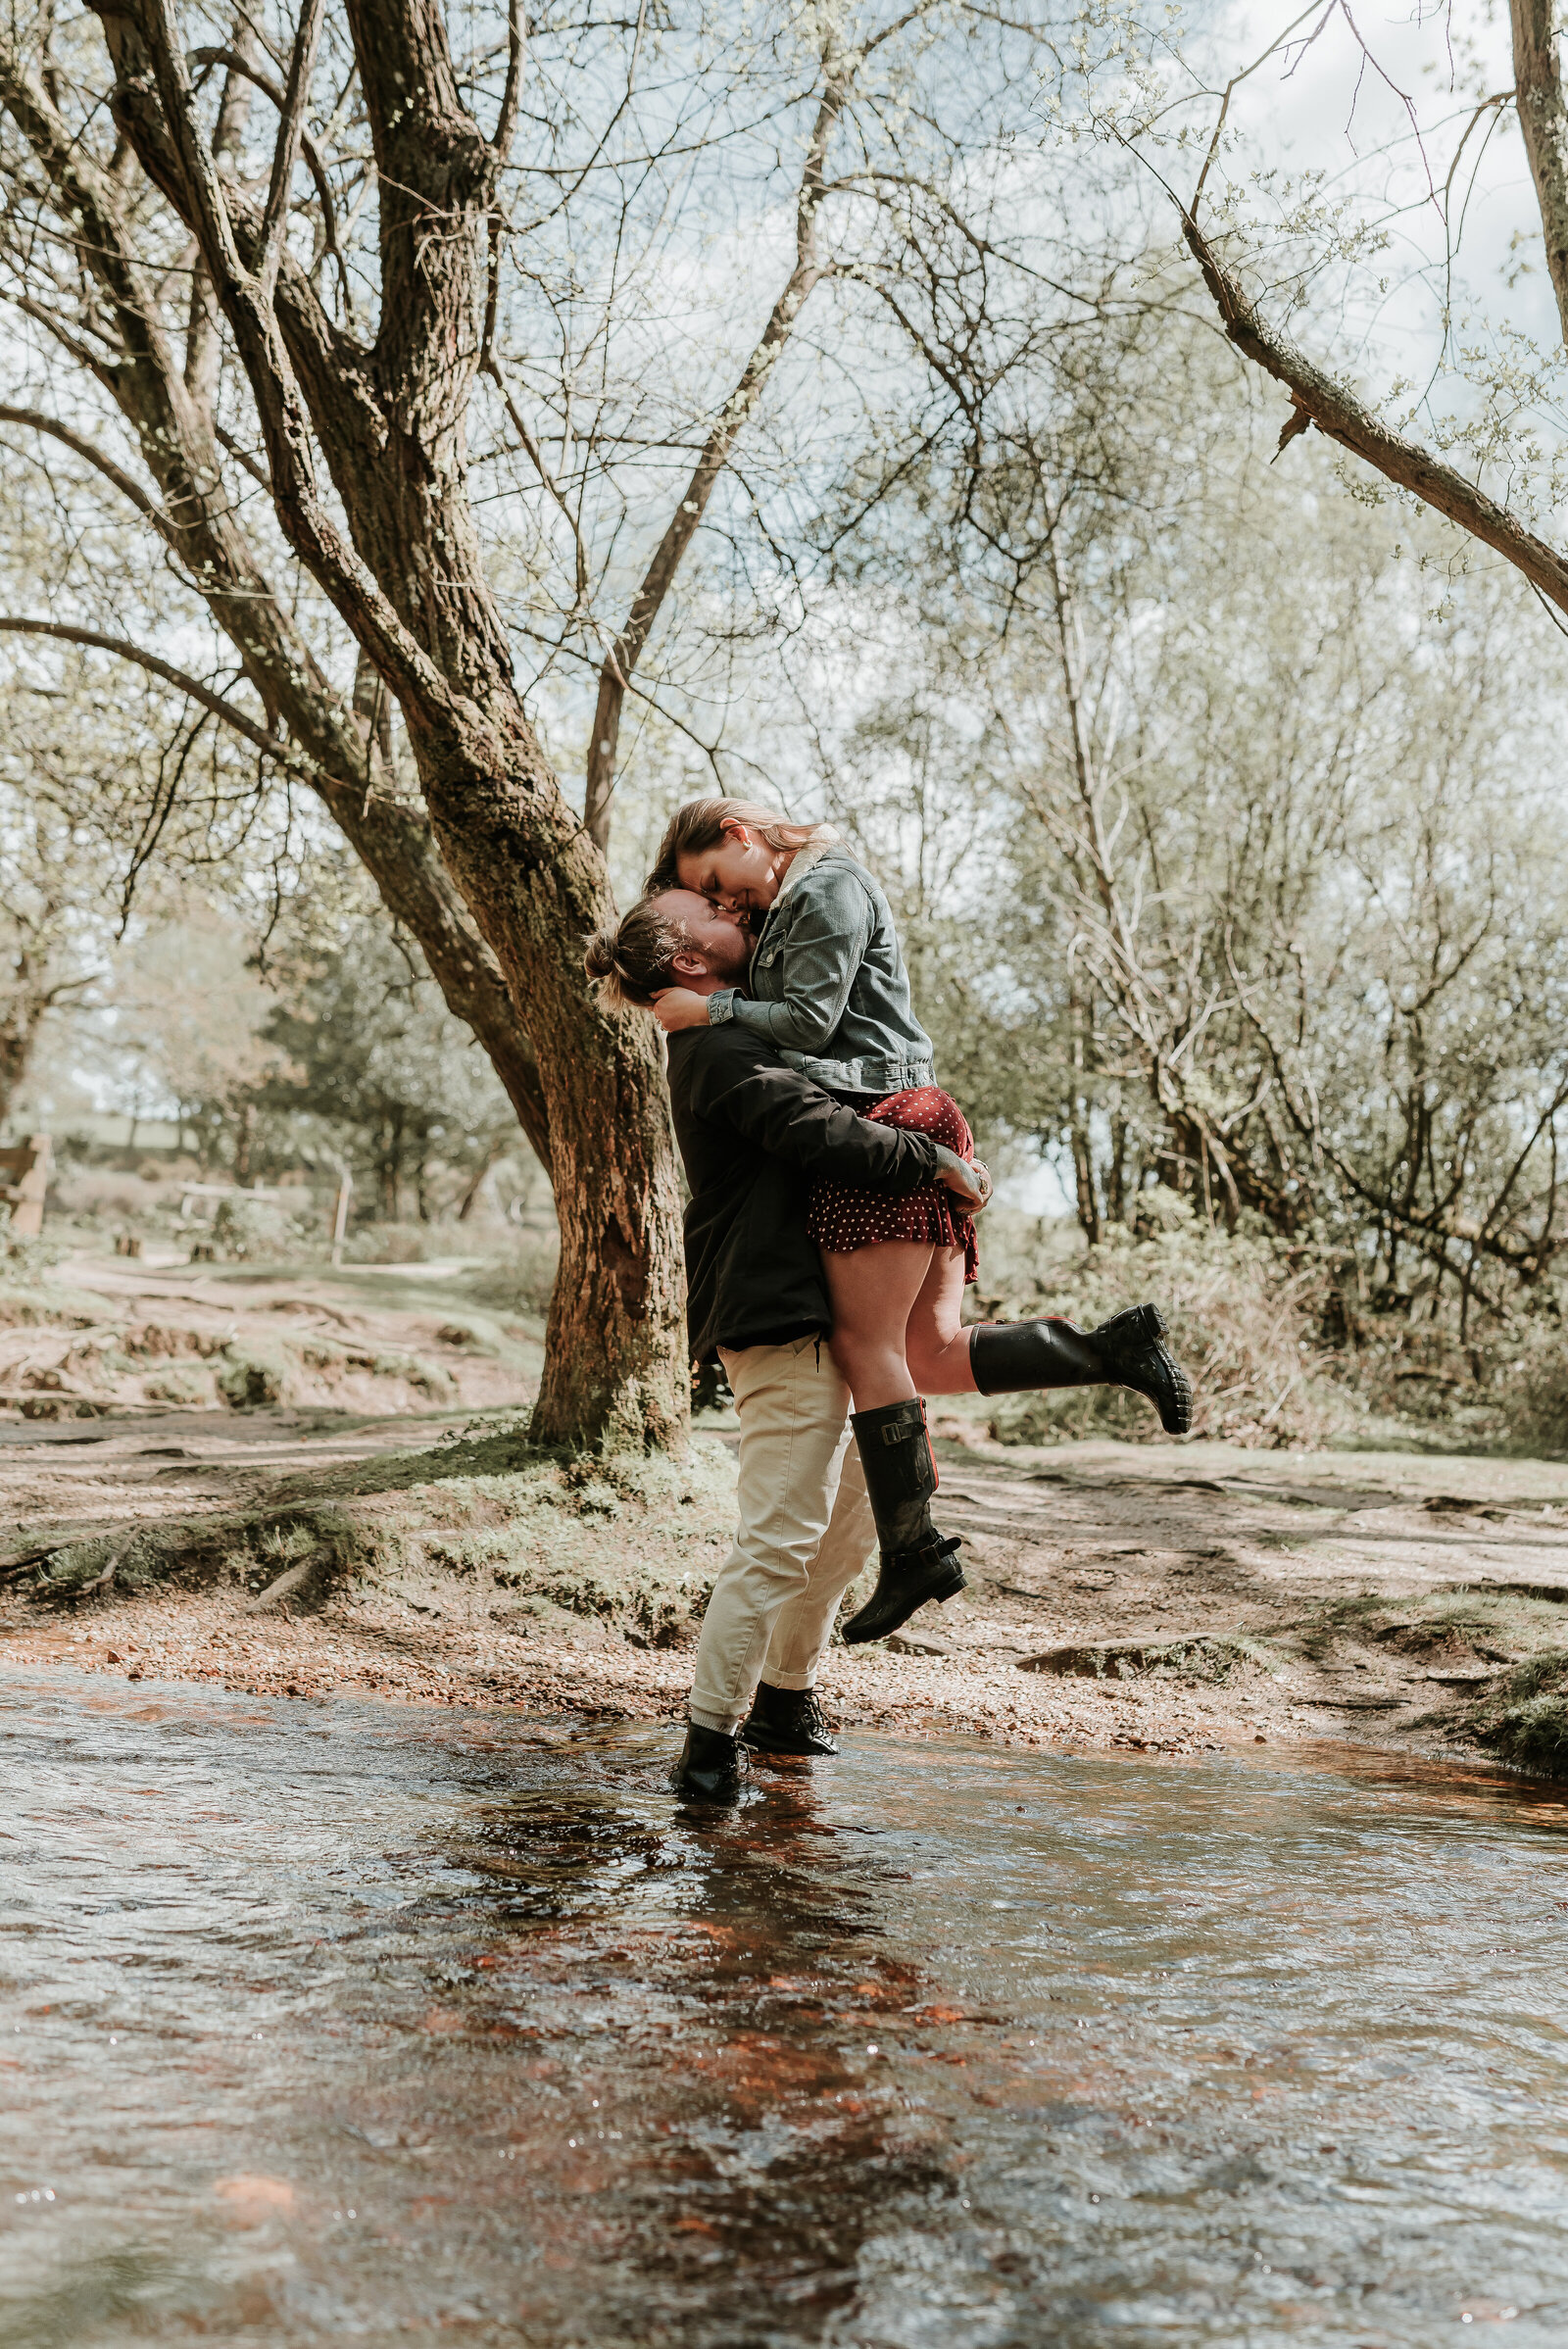 Man lifts his fiance up and couple embrace in a shallow river in the New Forest